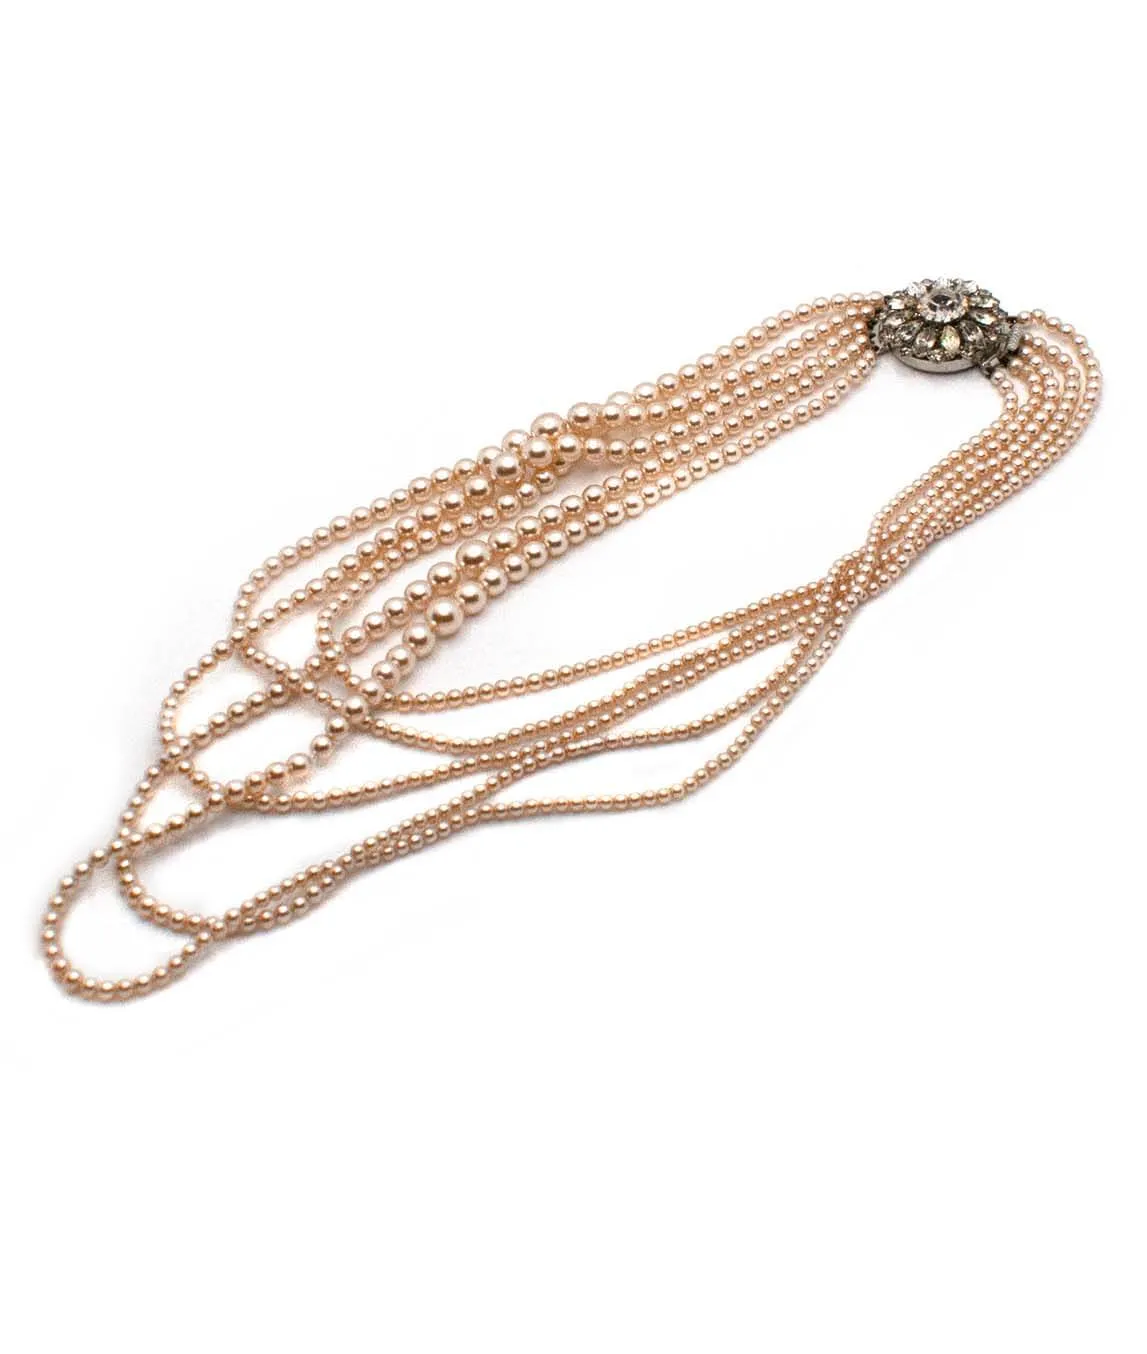 Vintage multi-strand faux pearl champagne coloured necklace with decorative clasp 